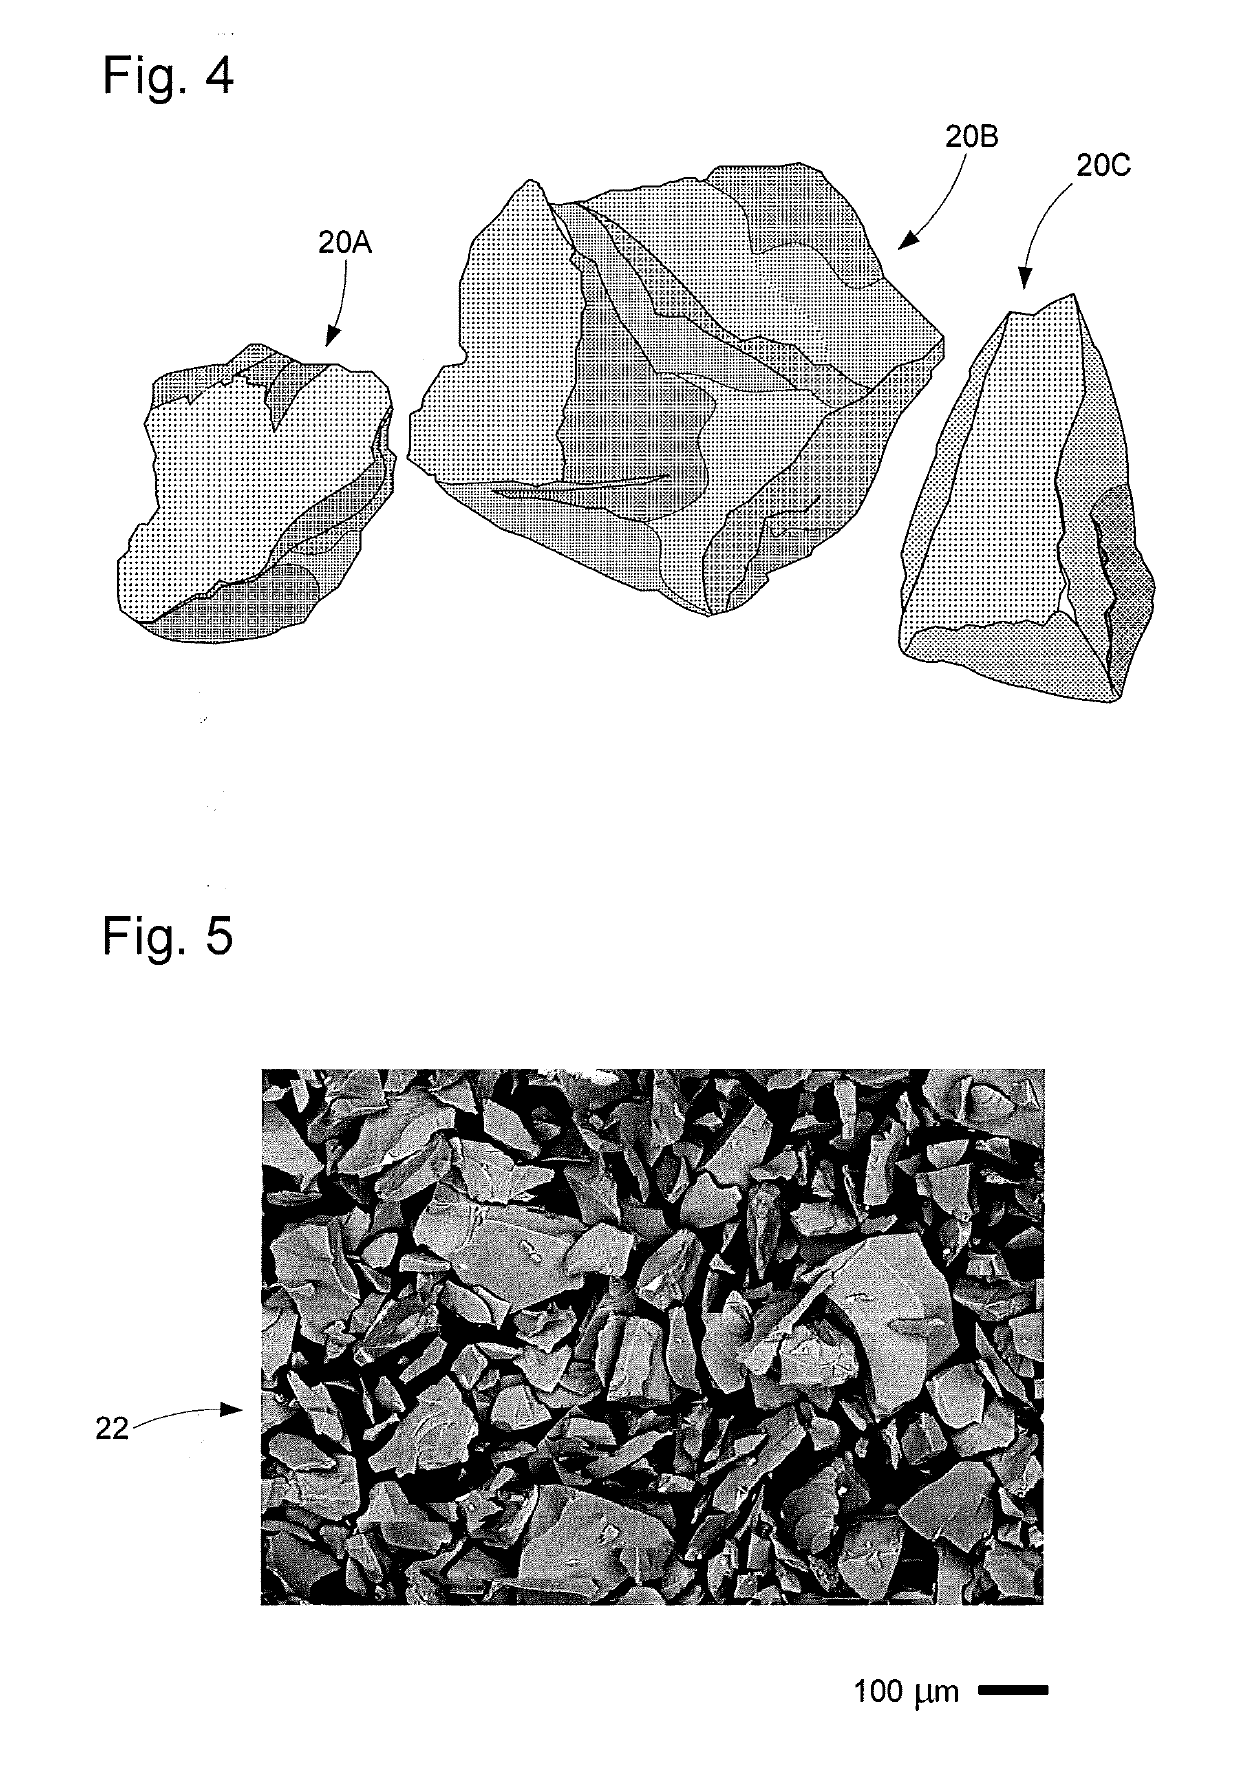 Method for fabricating timepiece components including a decorative coating of aventurine